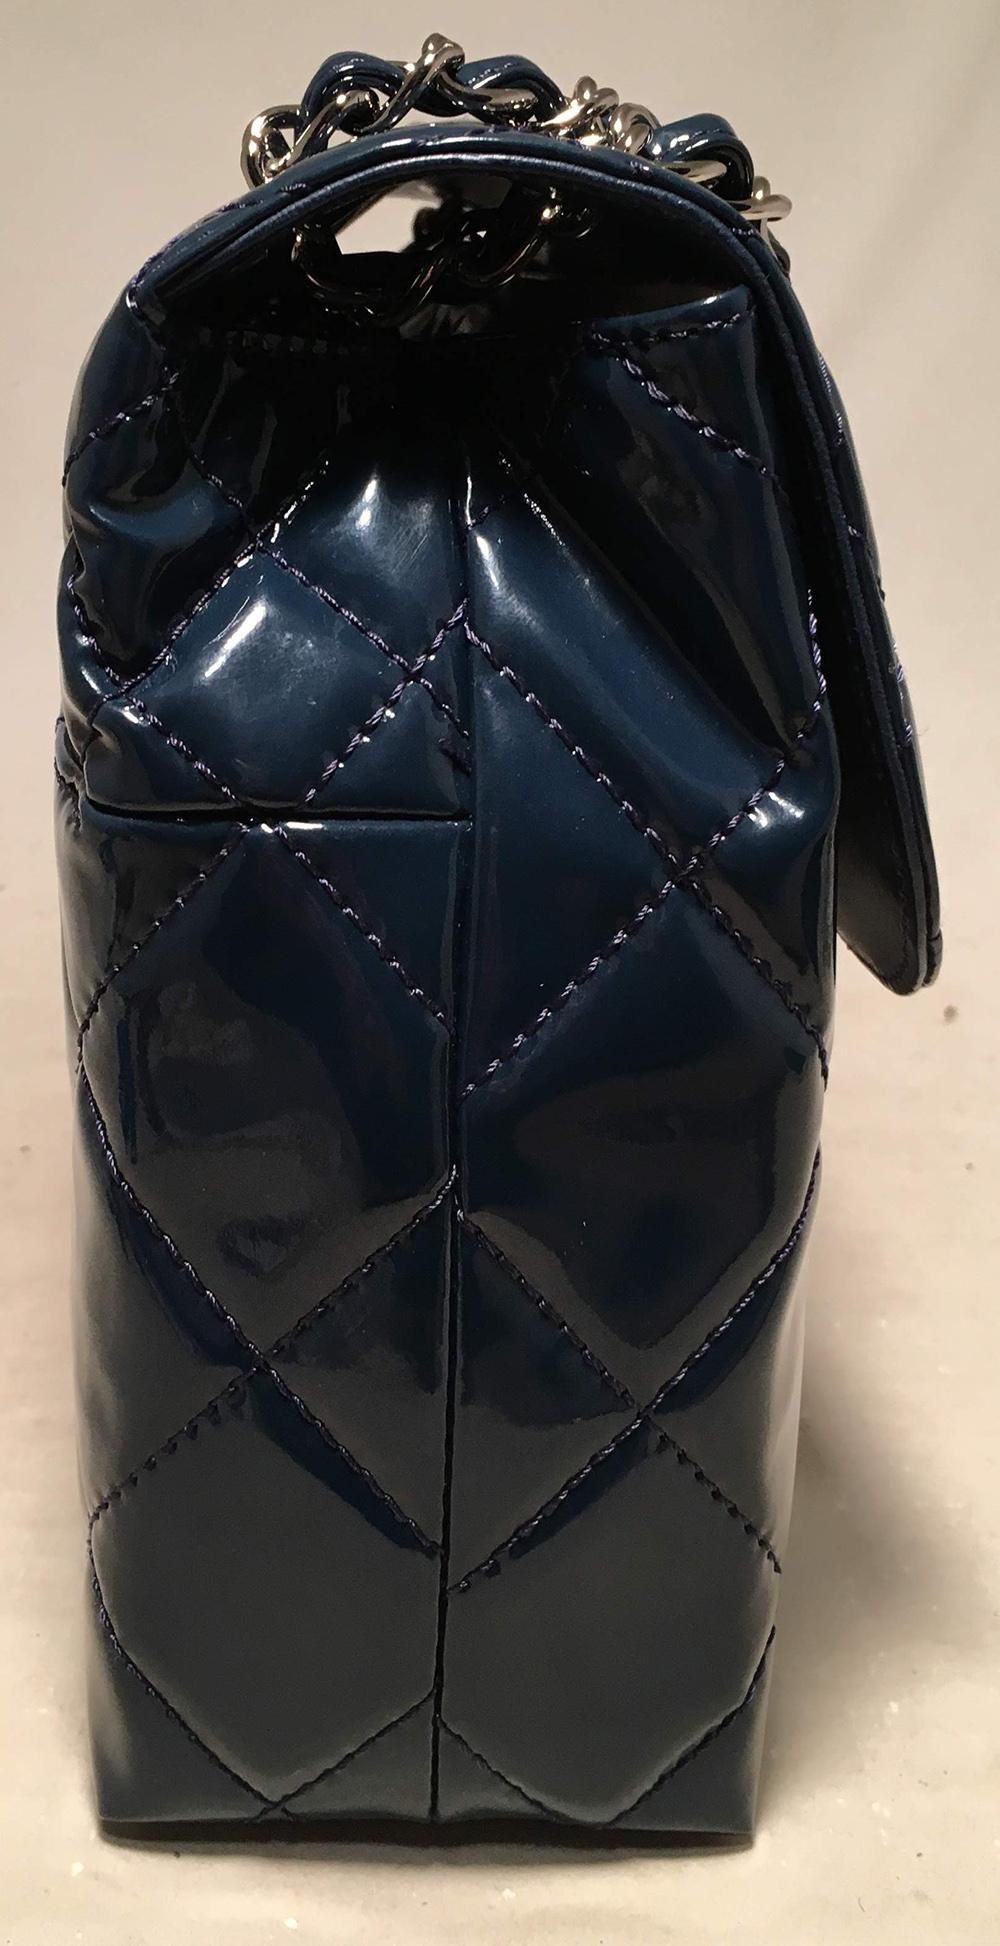 Chanel Navy Patent Leather Jumbo Classic Flap Shoulder Bag in excellent like-new condition. Navy patent leather quilted exterior trimmed with silver hardware and 2 different size quilt patterns along top and bottom. Signature CC logo twist closure